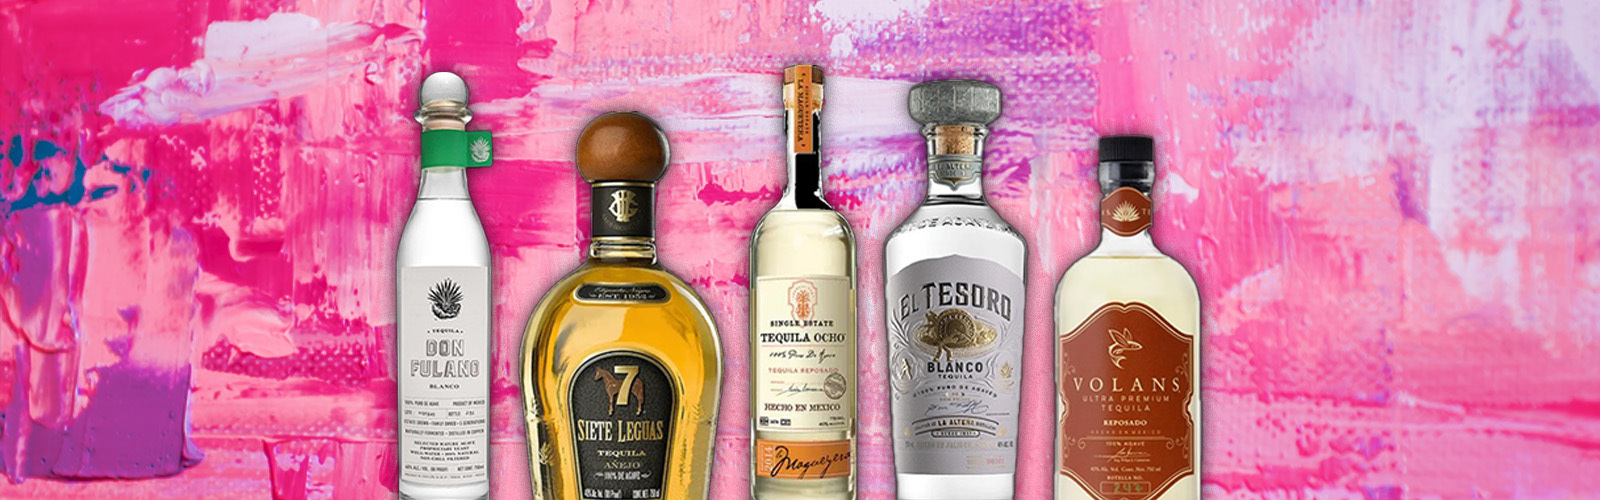 The 5 Absolute Best Bottles Of Tequila For A Perfect Cinco De Mayo